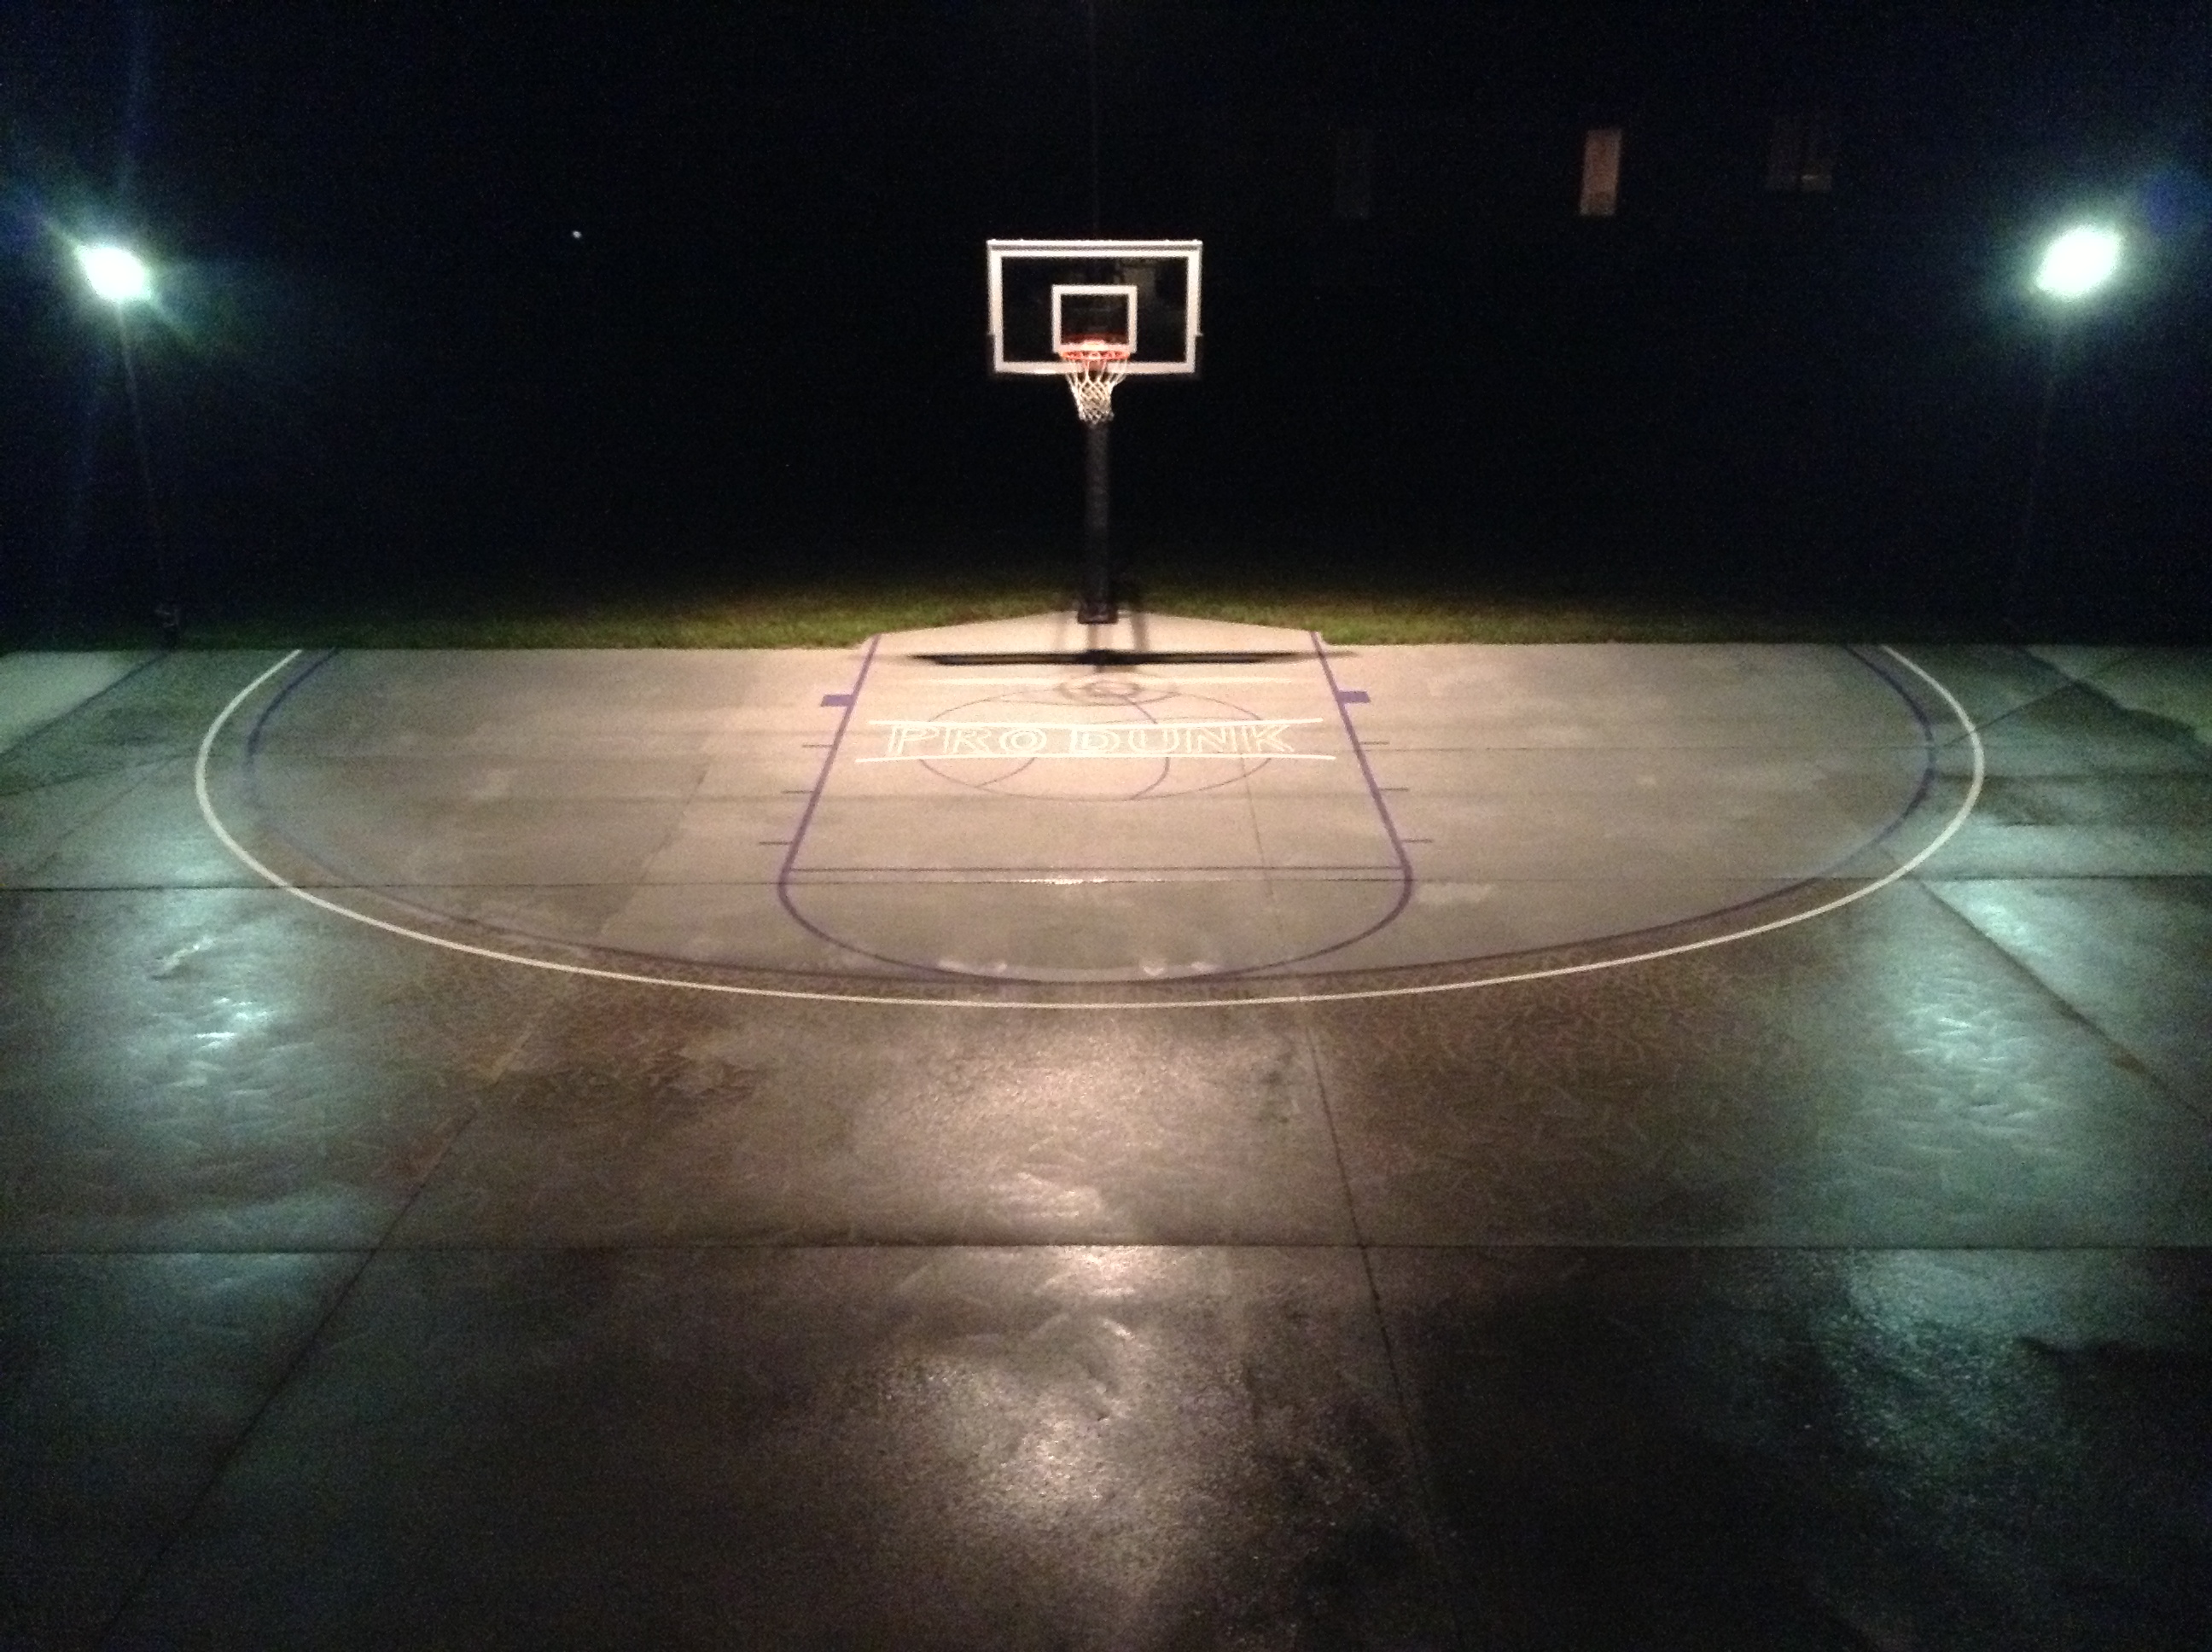 These night lights are so bright and makes basketball fun to play during the night.